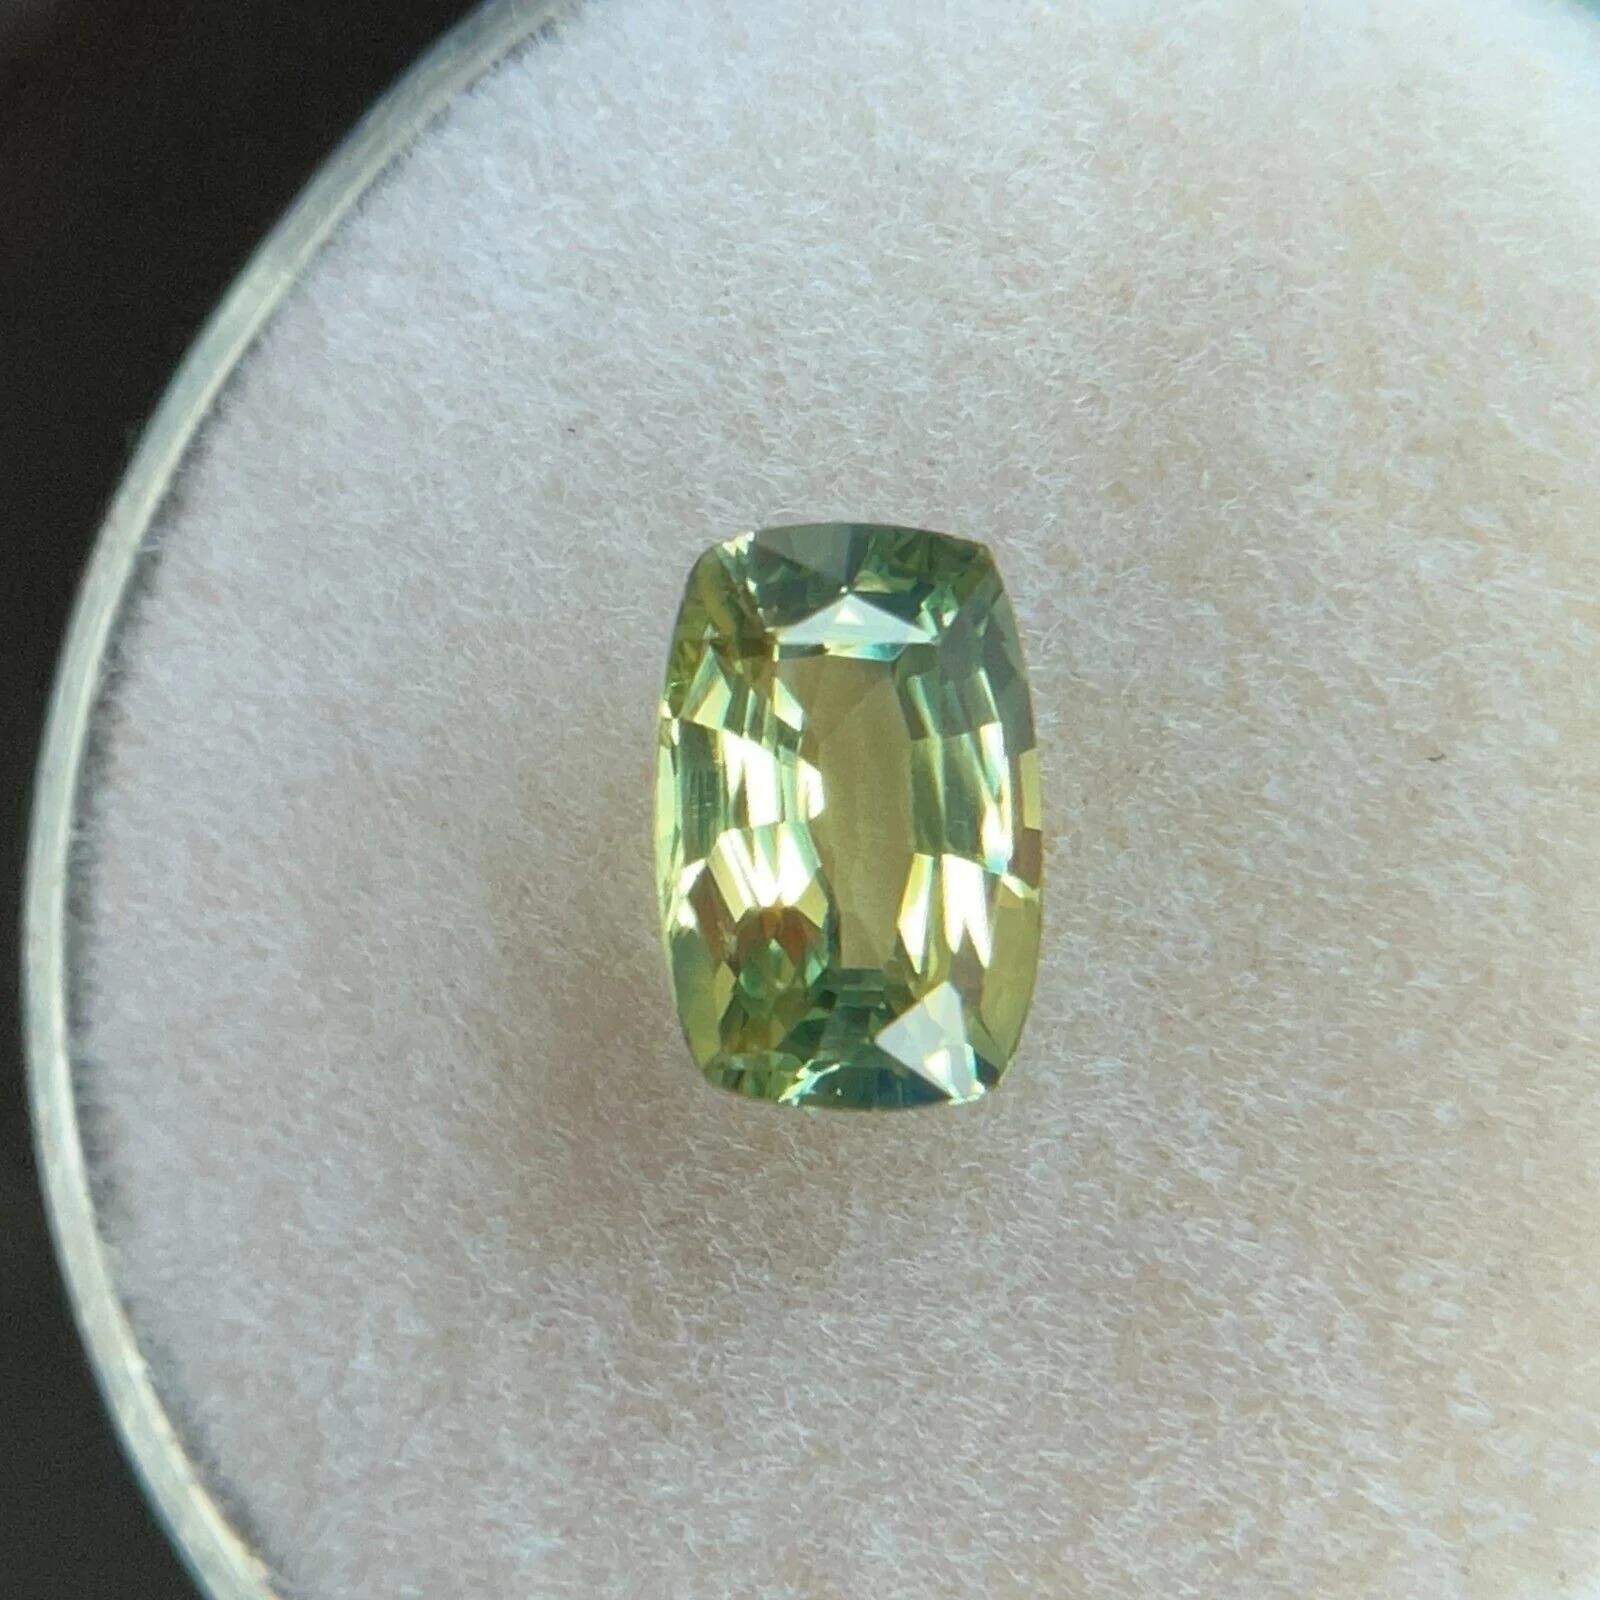 1.20ct GIA Certified Australia Sapphire No Heat Green Yellow Antique Cushion Cut

GIA Certified Untreated Green Yellow Australian Sapphire Gemstone. 
1.20 Carat unheated sapphire with a beautiful green yellow colour. Fully certified by GIA